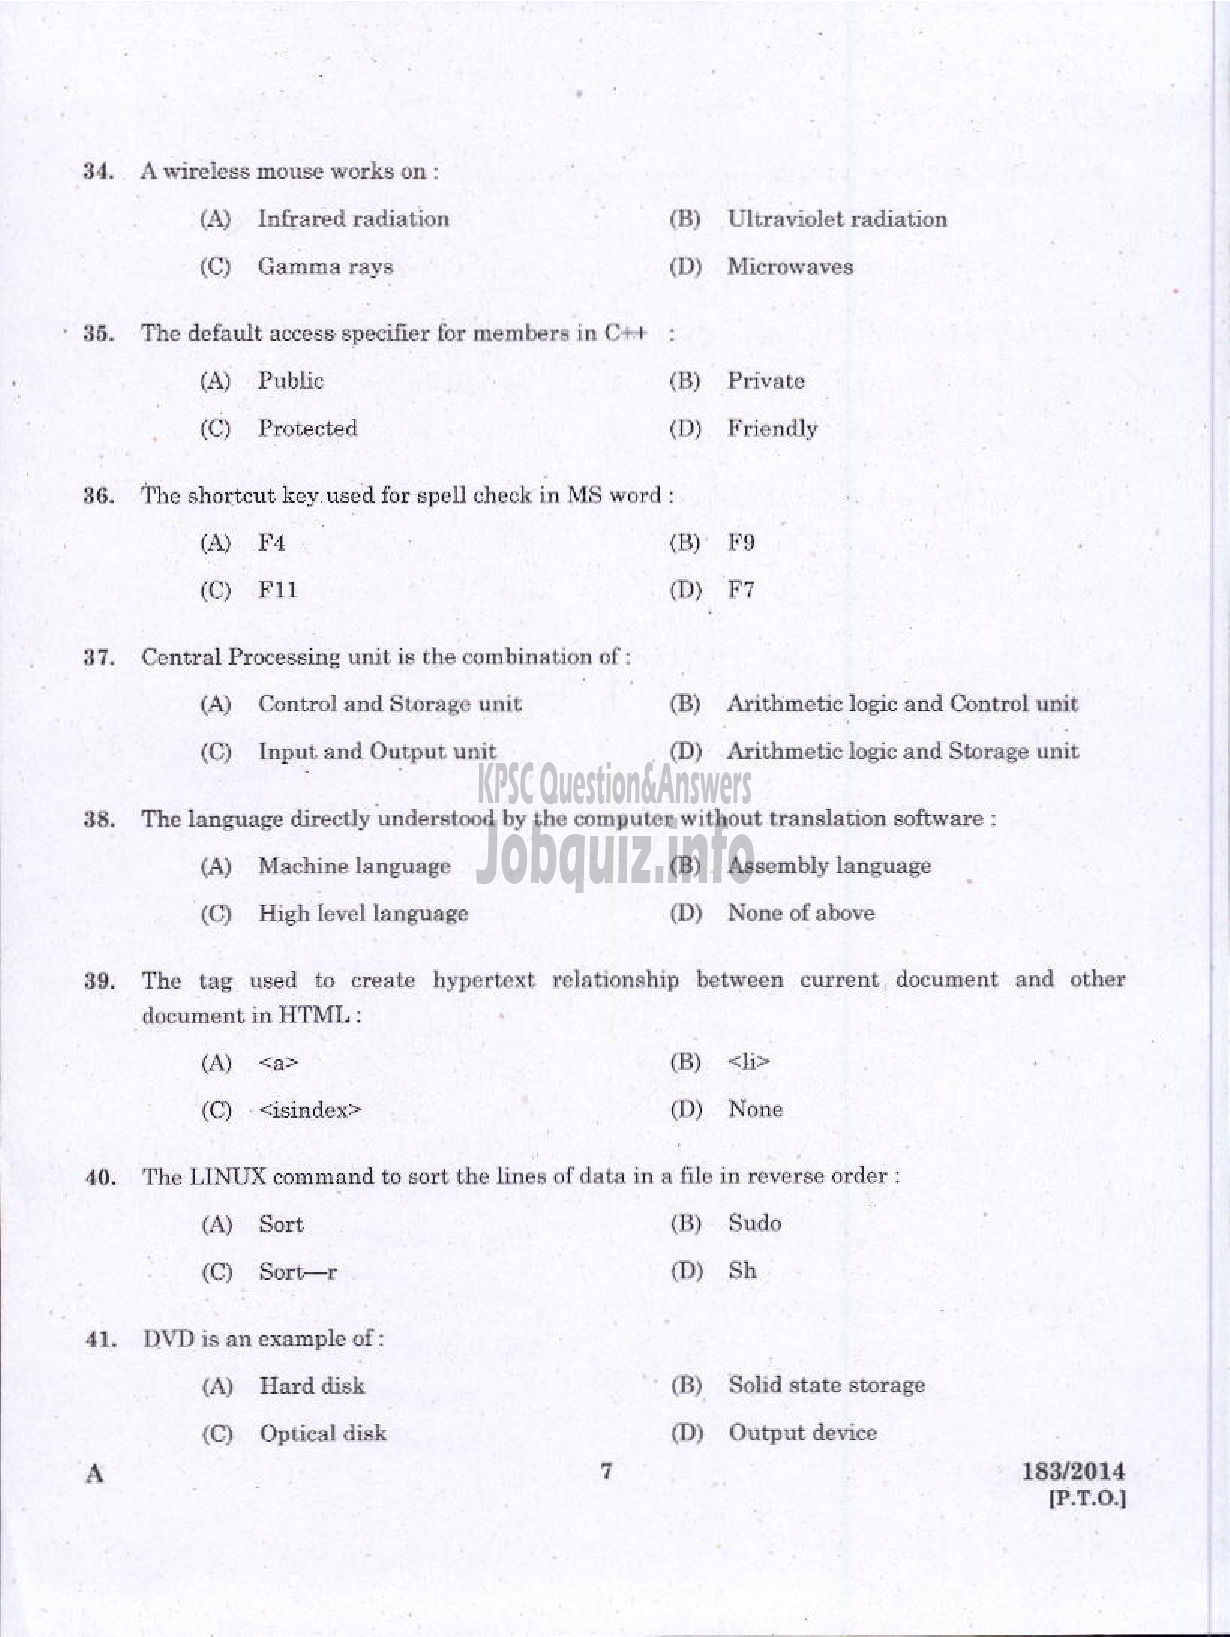 Kerala PSC Question Paper - TRADESMAN COMPUTER ENGINEERING TECHNICAL EDUCATION TVM KGD-5